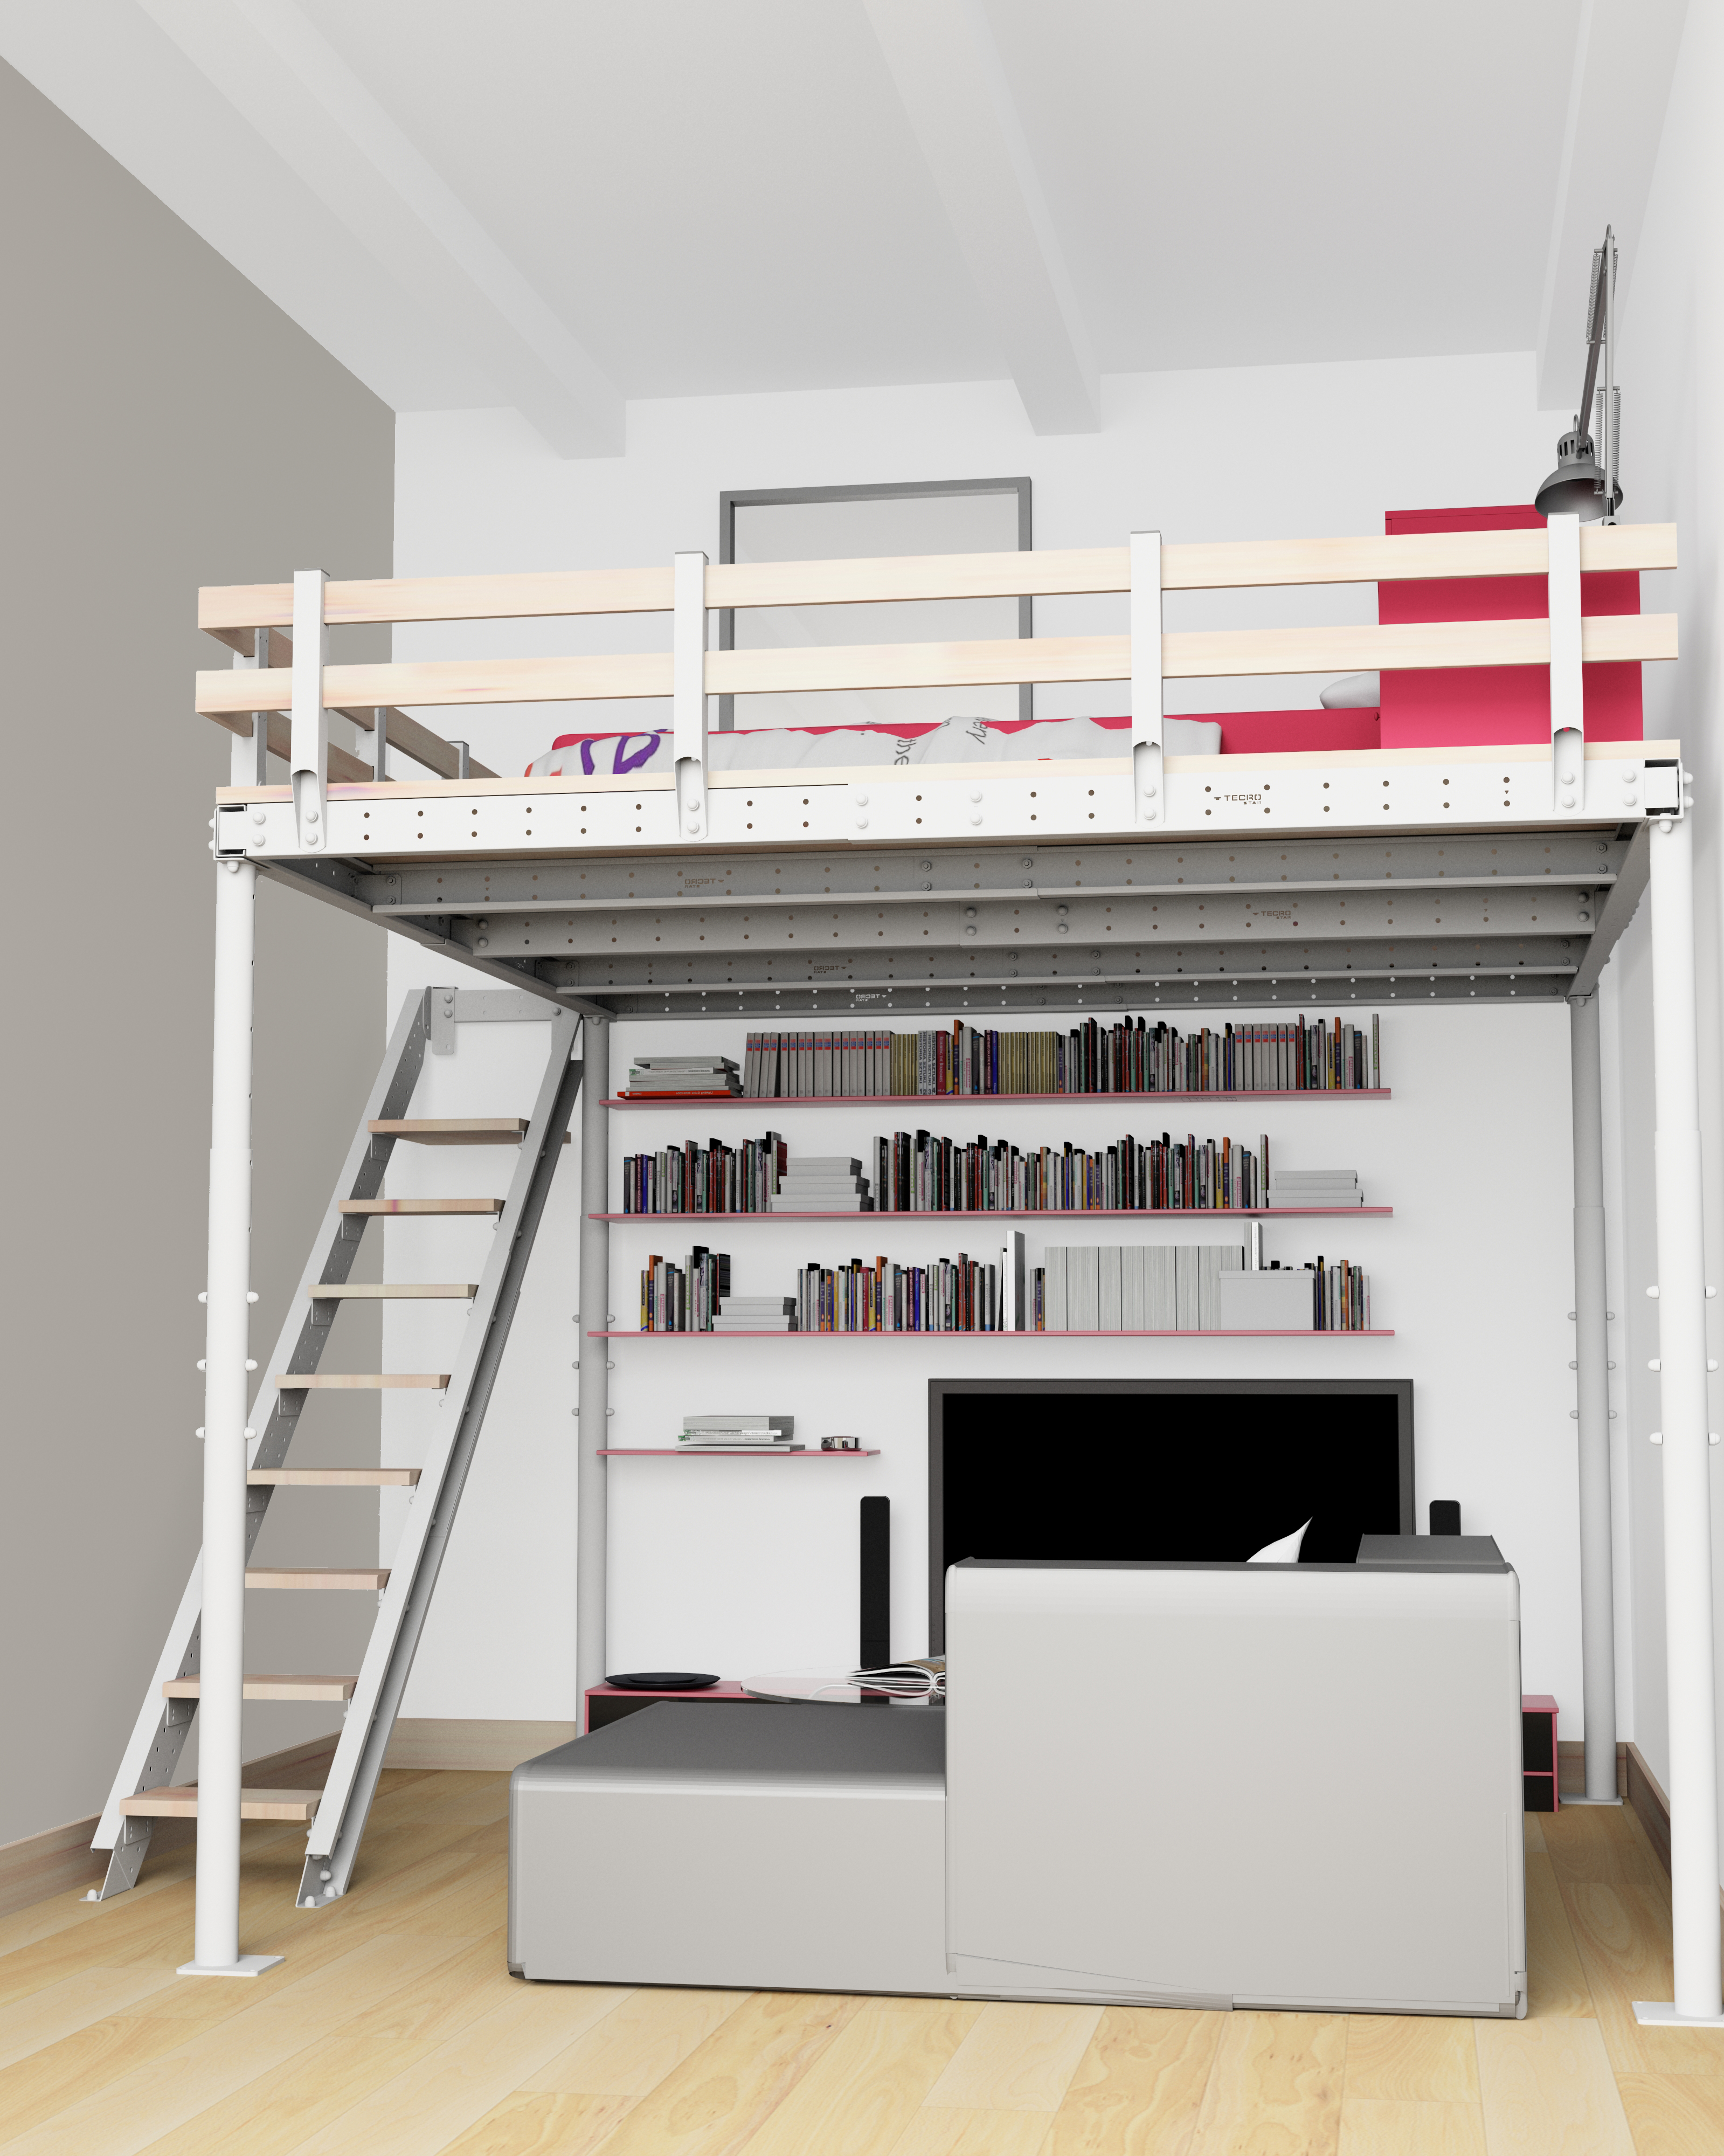 Diy Loft Bed Kit Expand Furniture, Do It Yourself Loft Bed Kits